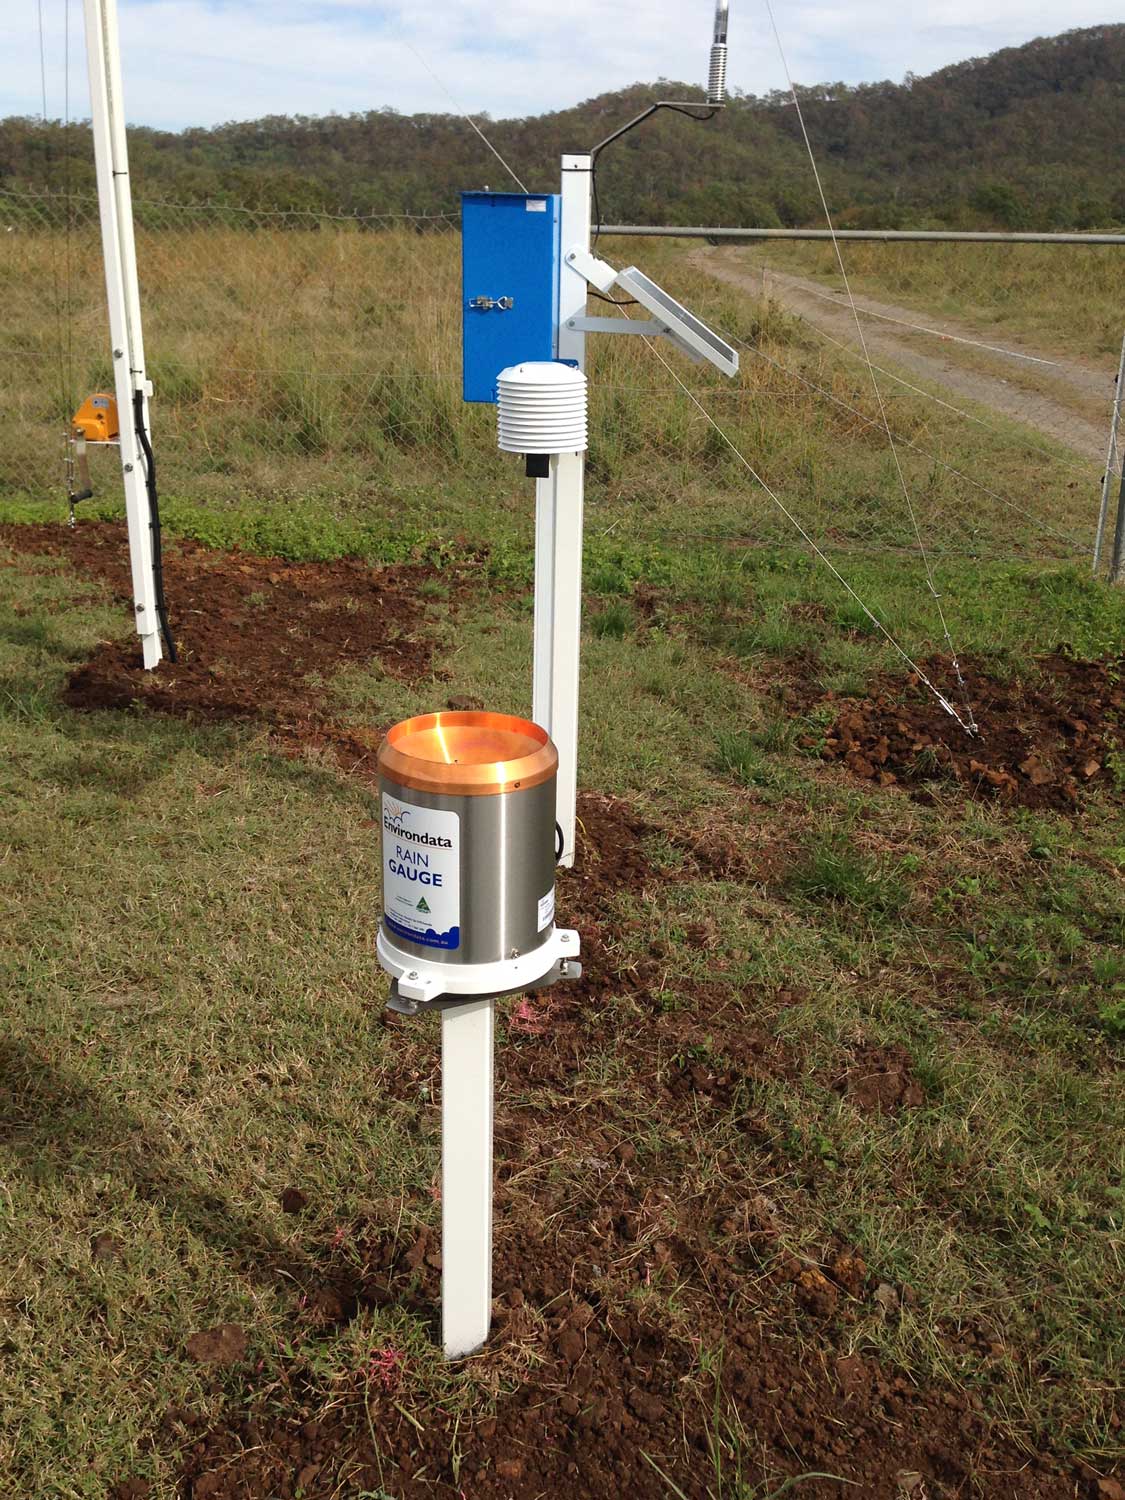 RG50 Tipping Bucket Rain Gauge installed at a Landfill in QLD